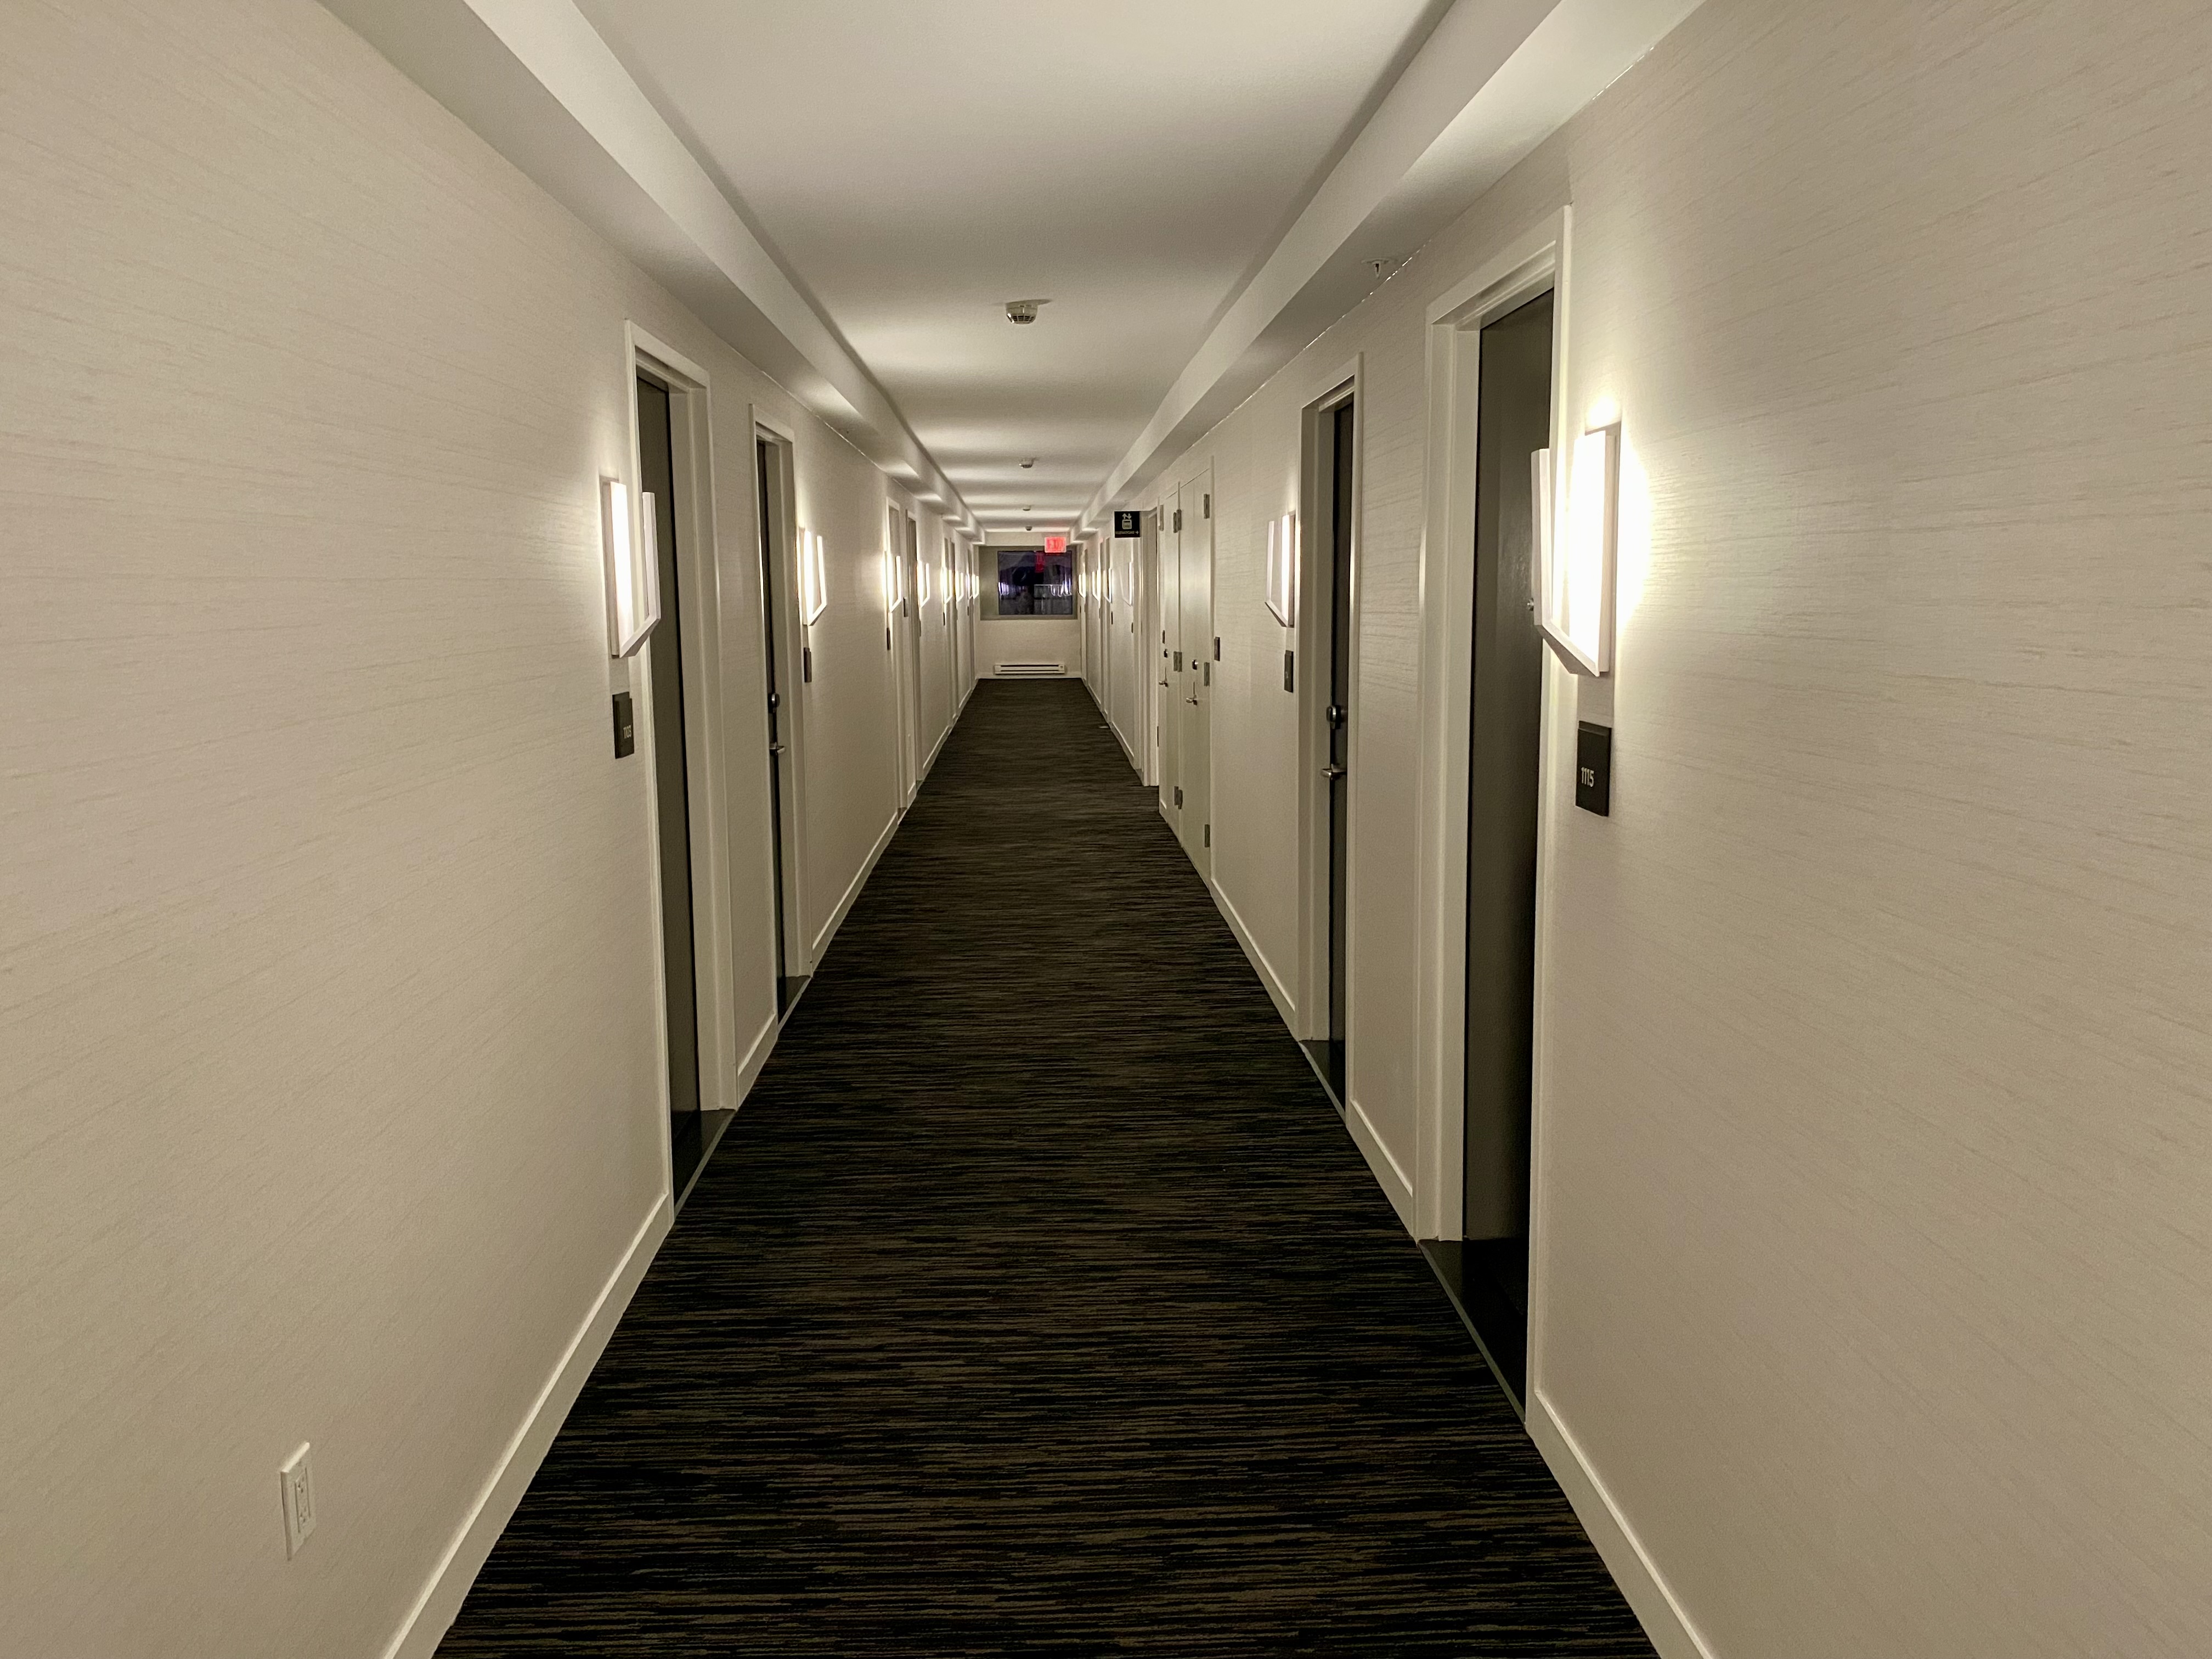 a hallway with doors and lights